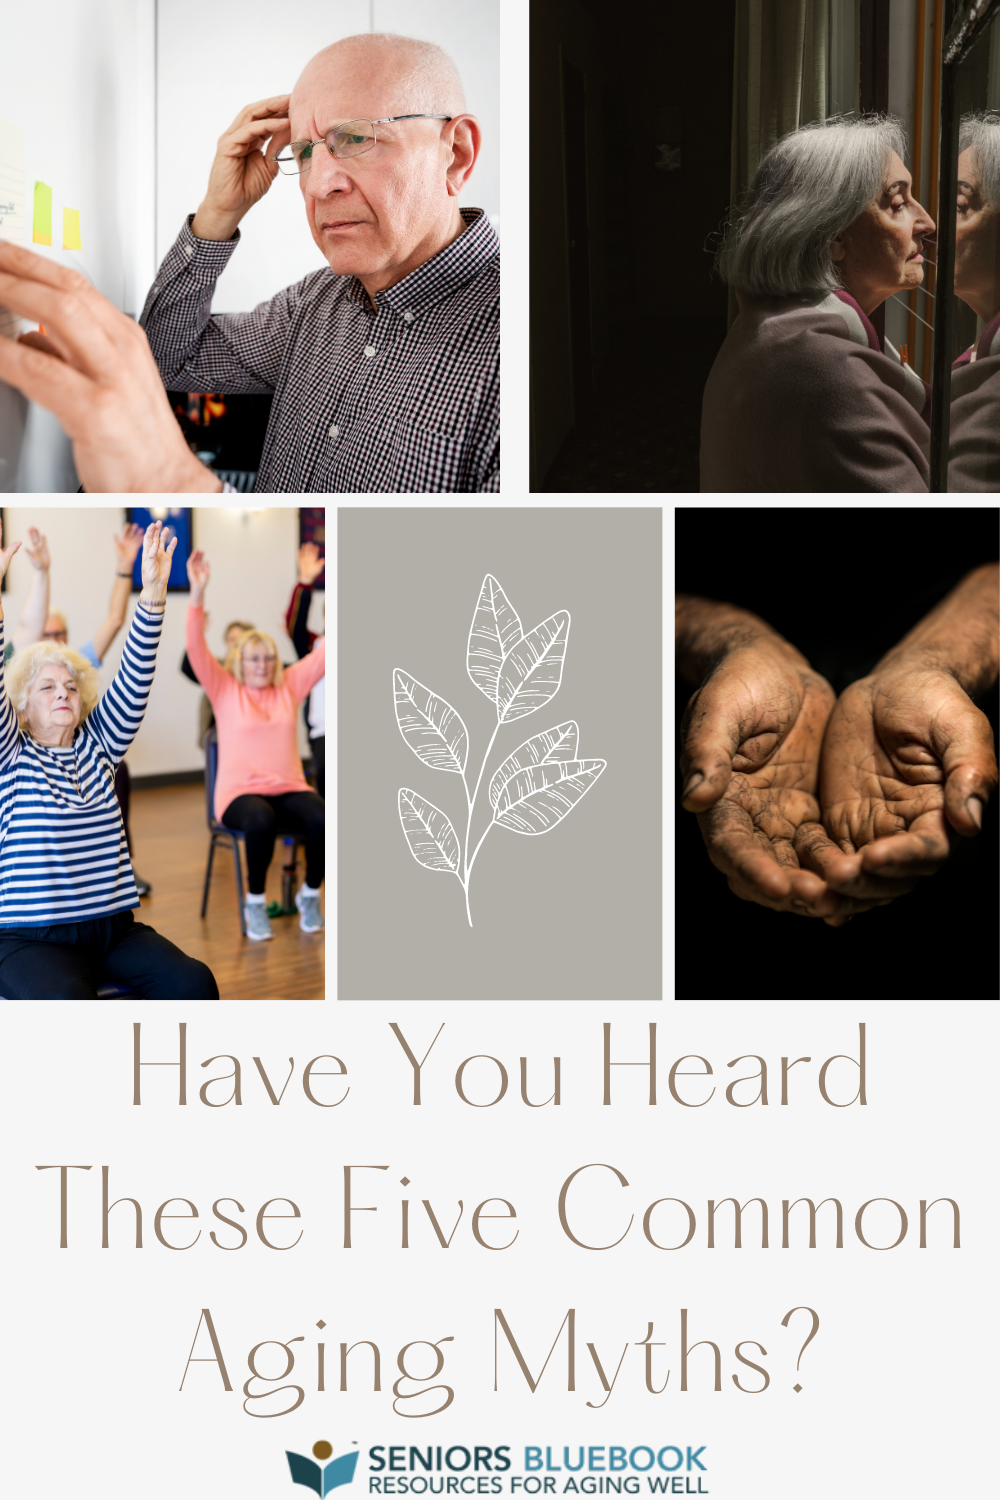 Articles - Have You Heard These Five Common Aging Myths? | Seniors